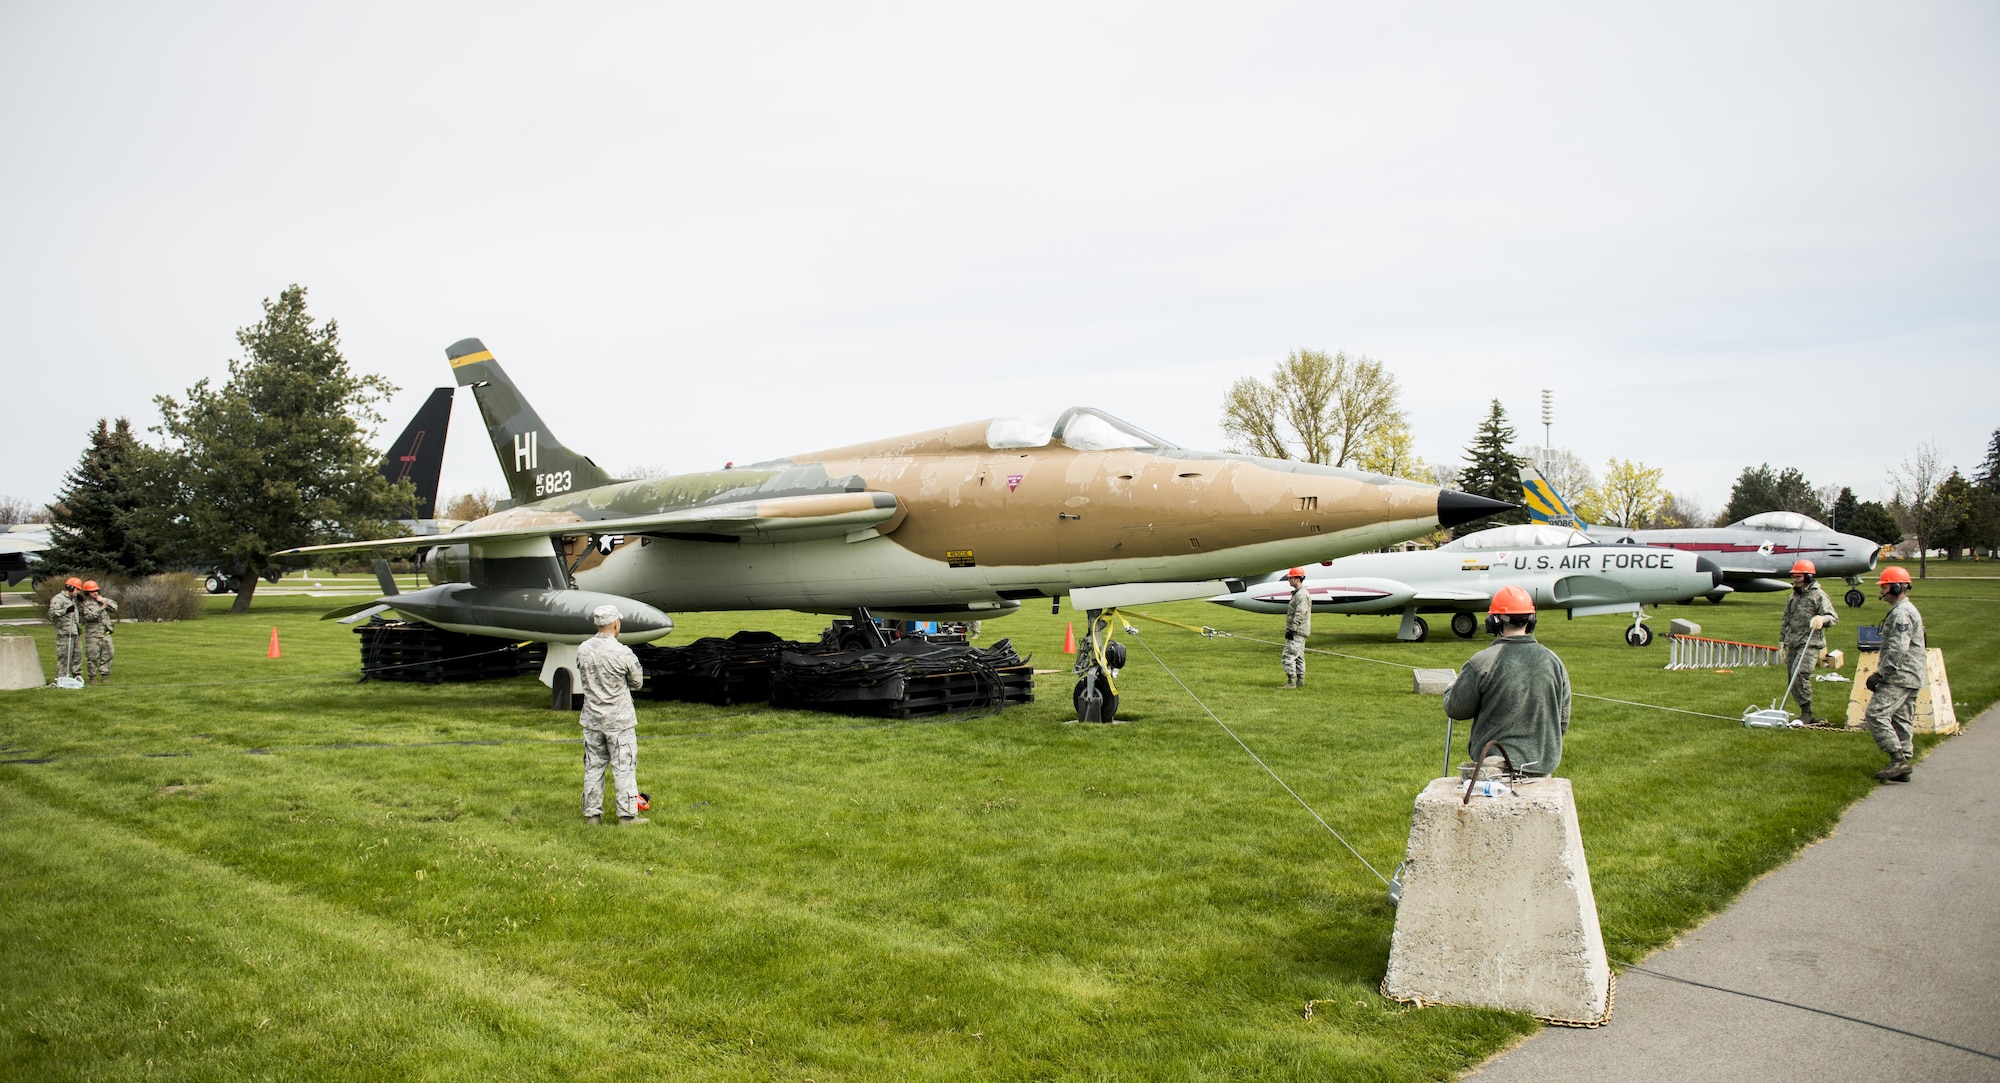 Fairchild Airmen airlift a historic F-105D Thunderchief display to make repairs to the footings May 1, 2017, at Fairchild Air Force Base, Washington. This aircraft has been at the Fairchild Heritage Park since 1981, and was dedicated on behalf of Washington native, Capt. James Shively, a F-105 pilot and prisoner of war in Vietnam. (U.S. Air Force photo/ Airman 1st Class Sean Campbell)